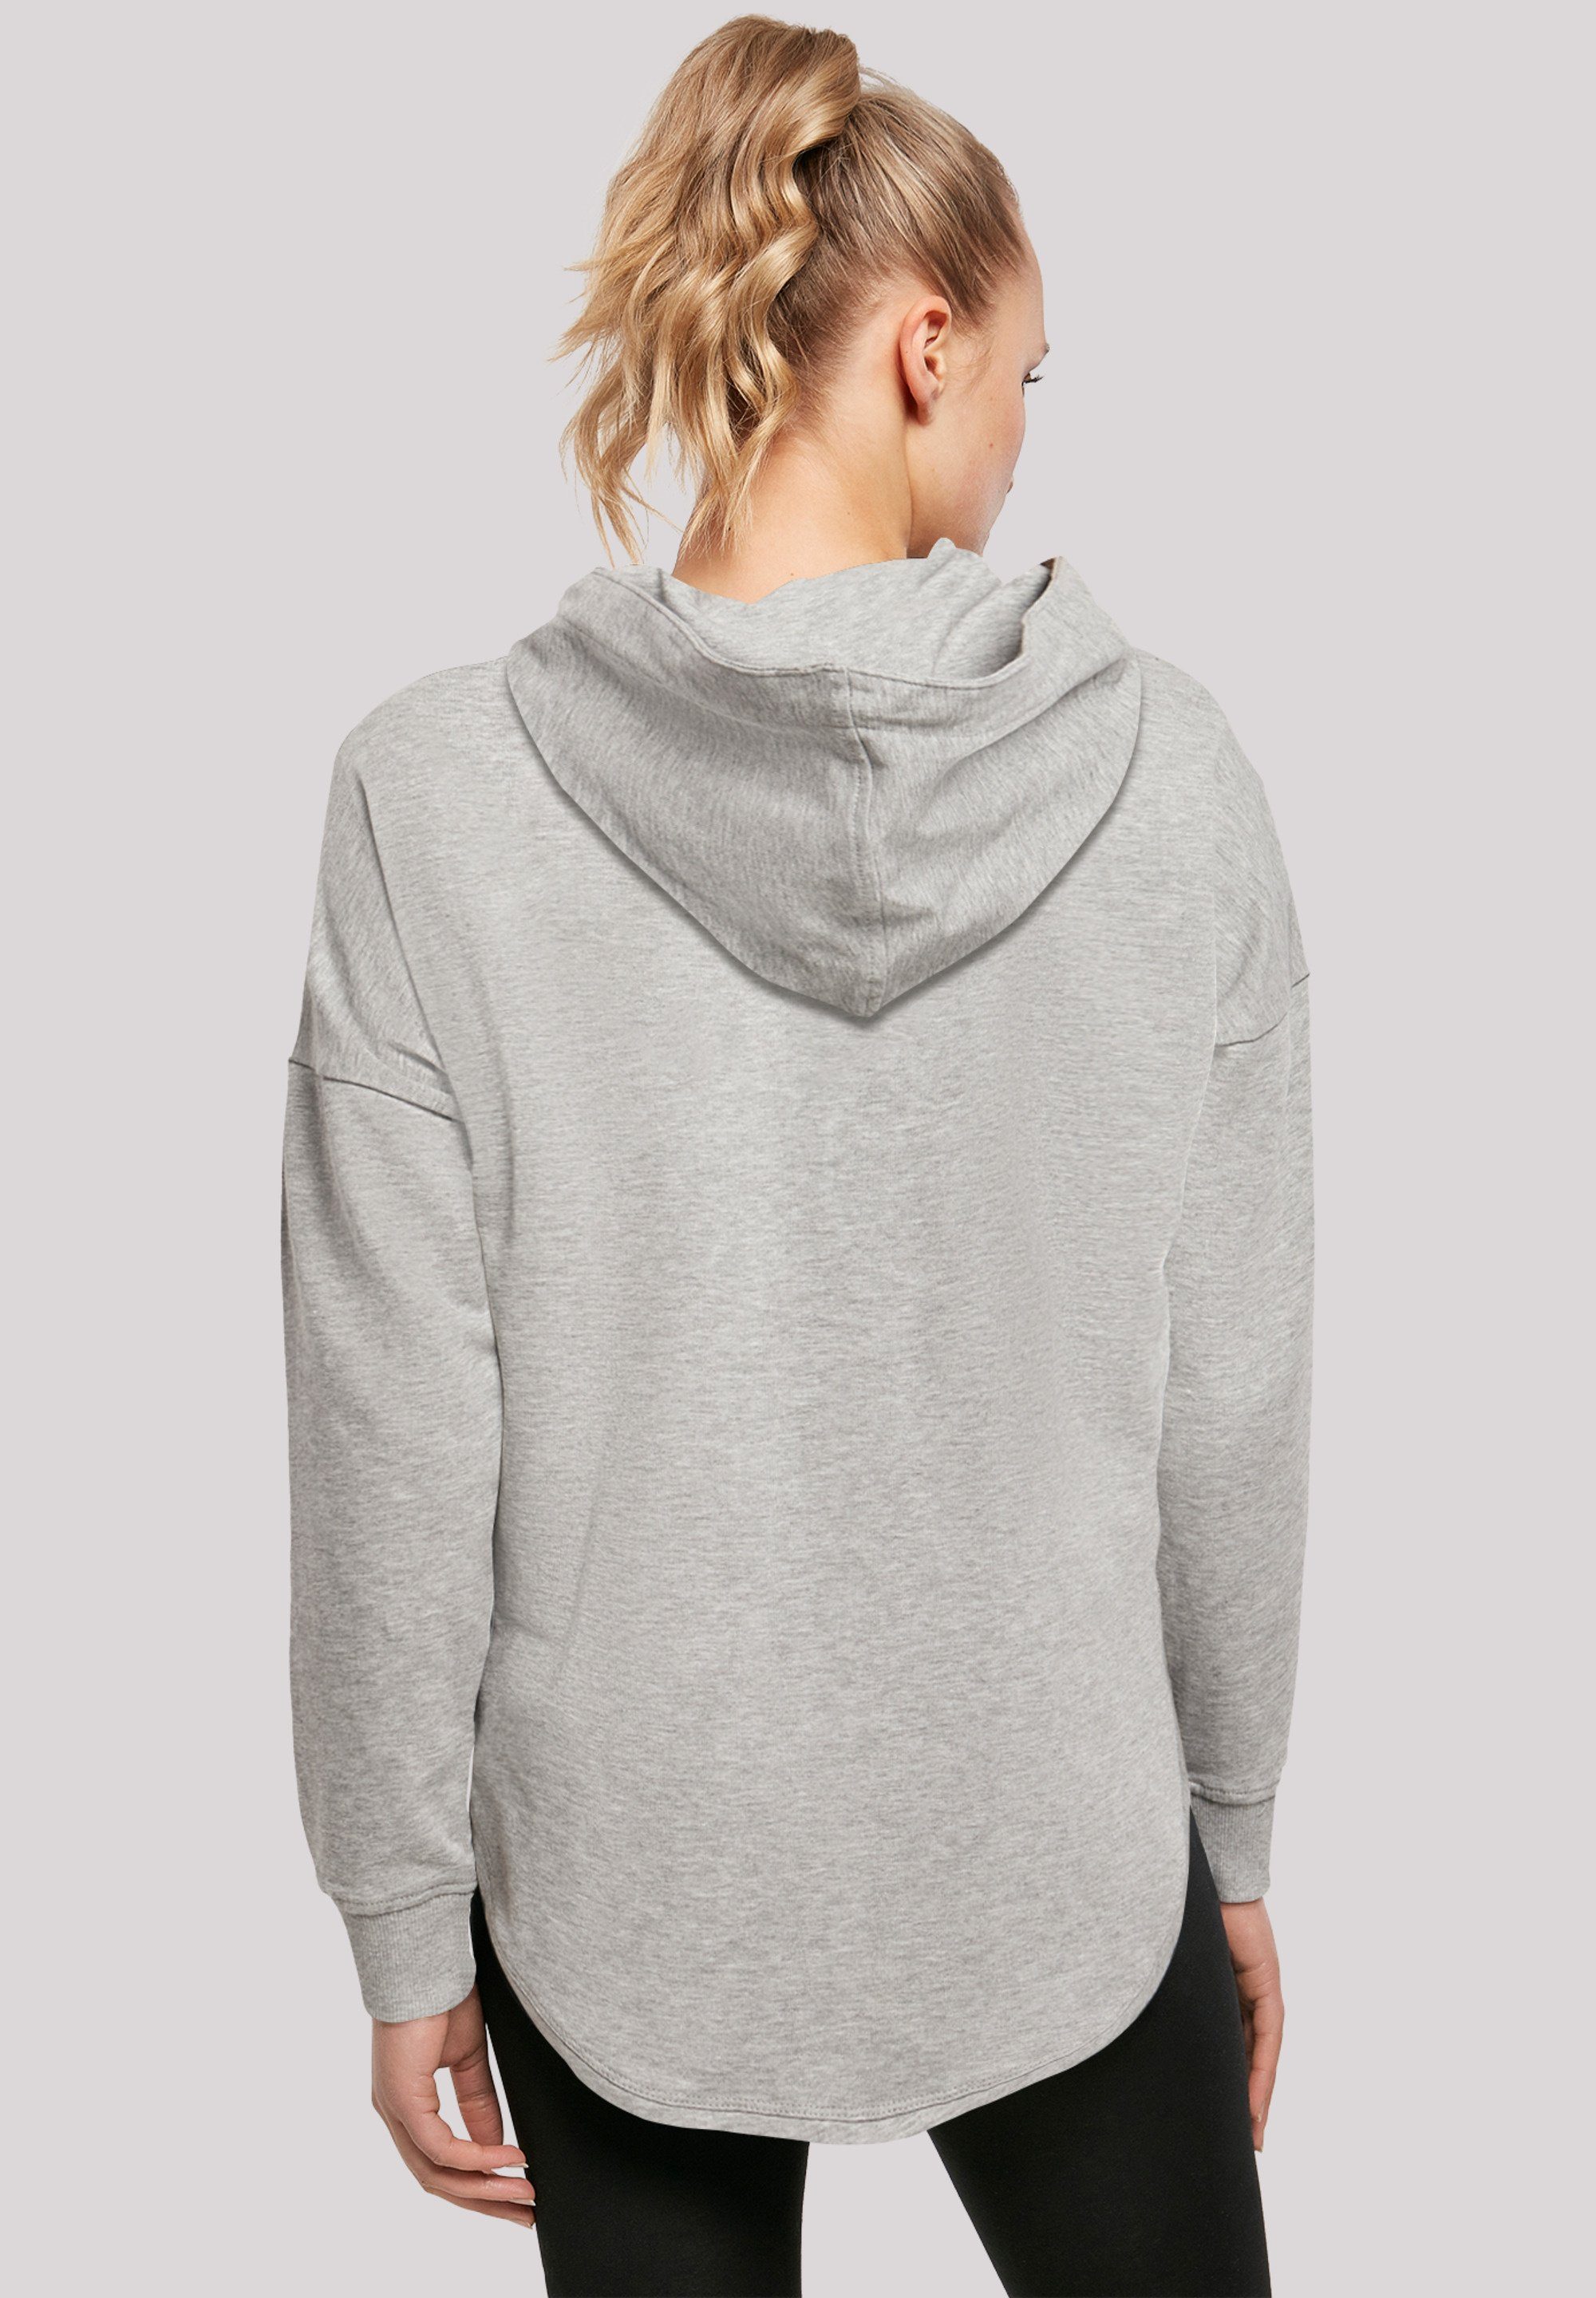 F4NT4STIC Kapuzenpullover Silvester Party #partytime grey Print